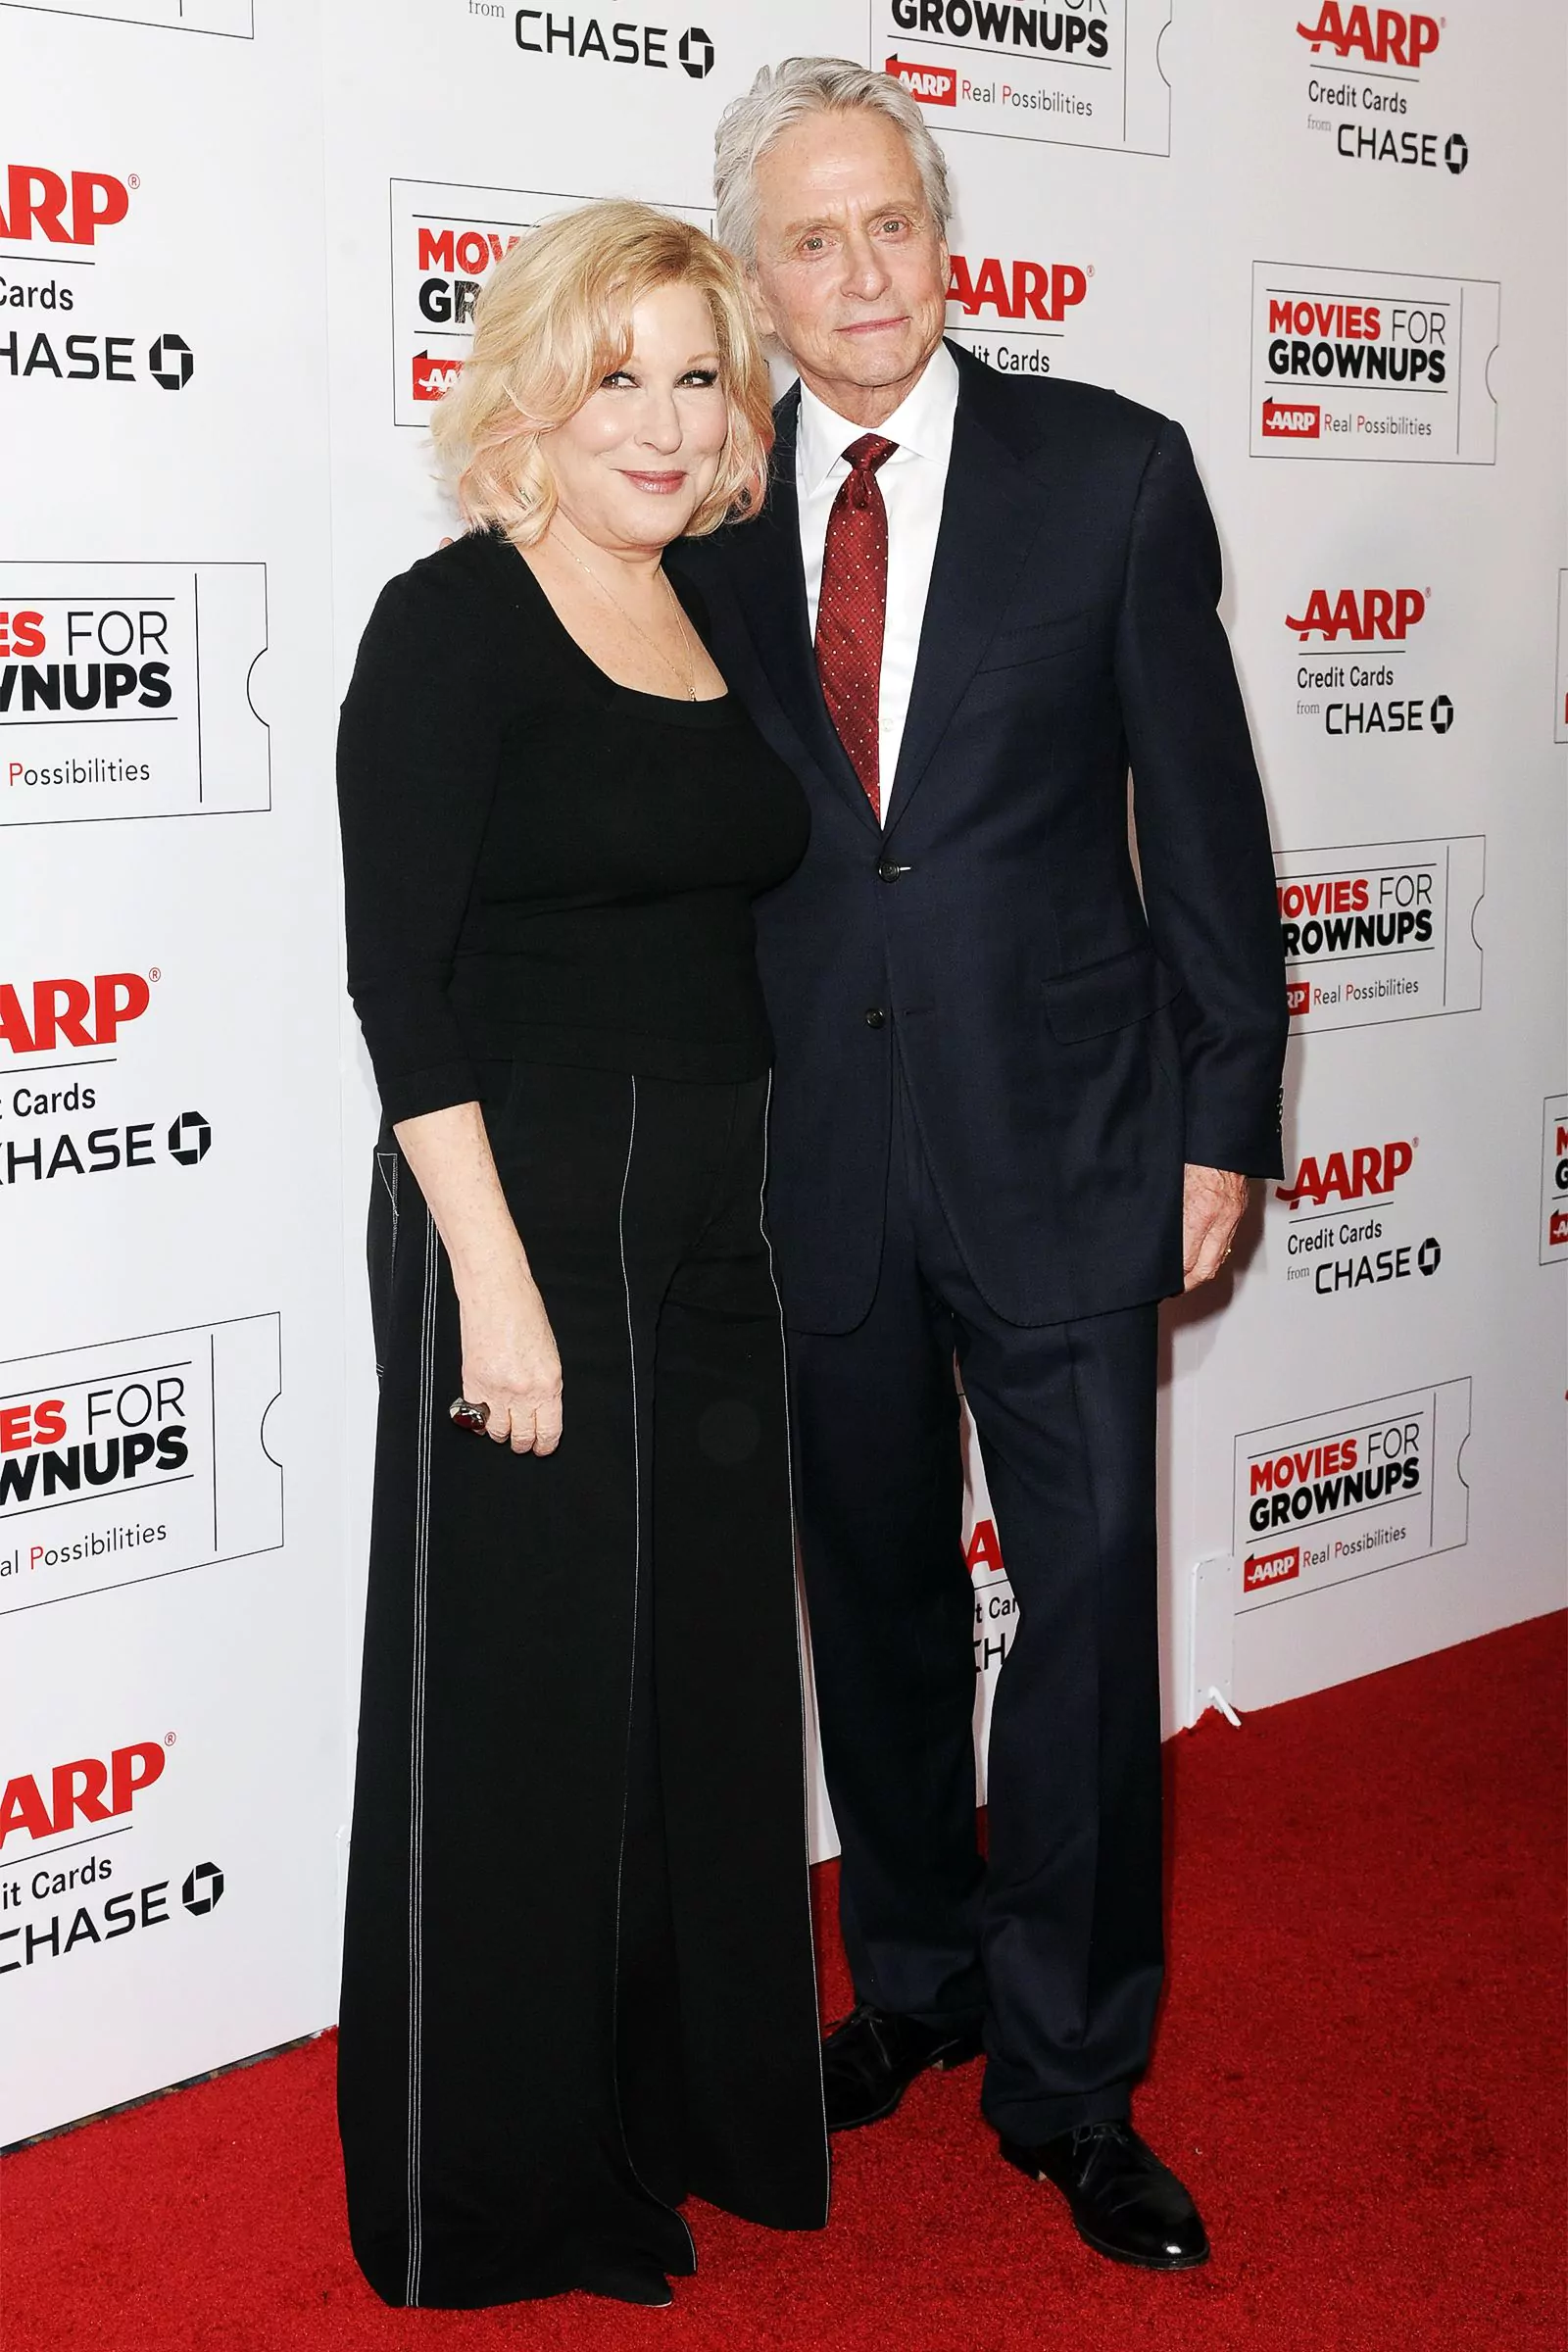 Bette Midler and Michael Douglas at the AARP Movies for Grownups Awards in Los Angeles on February 8, 2016.